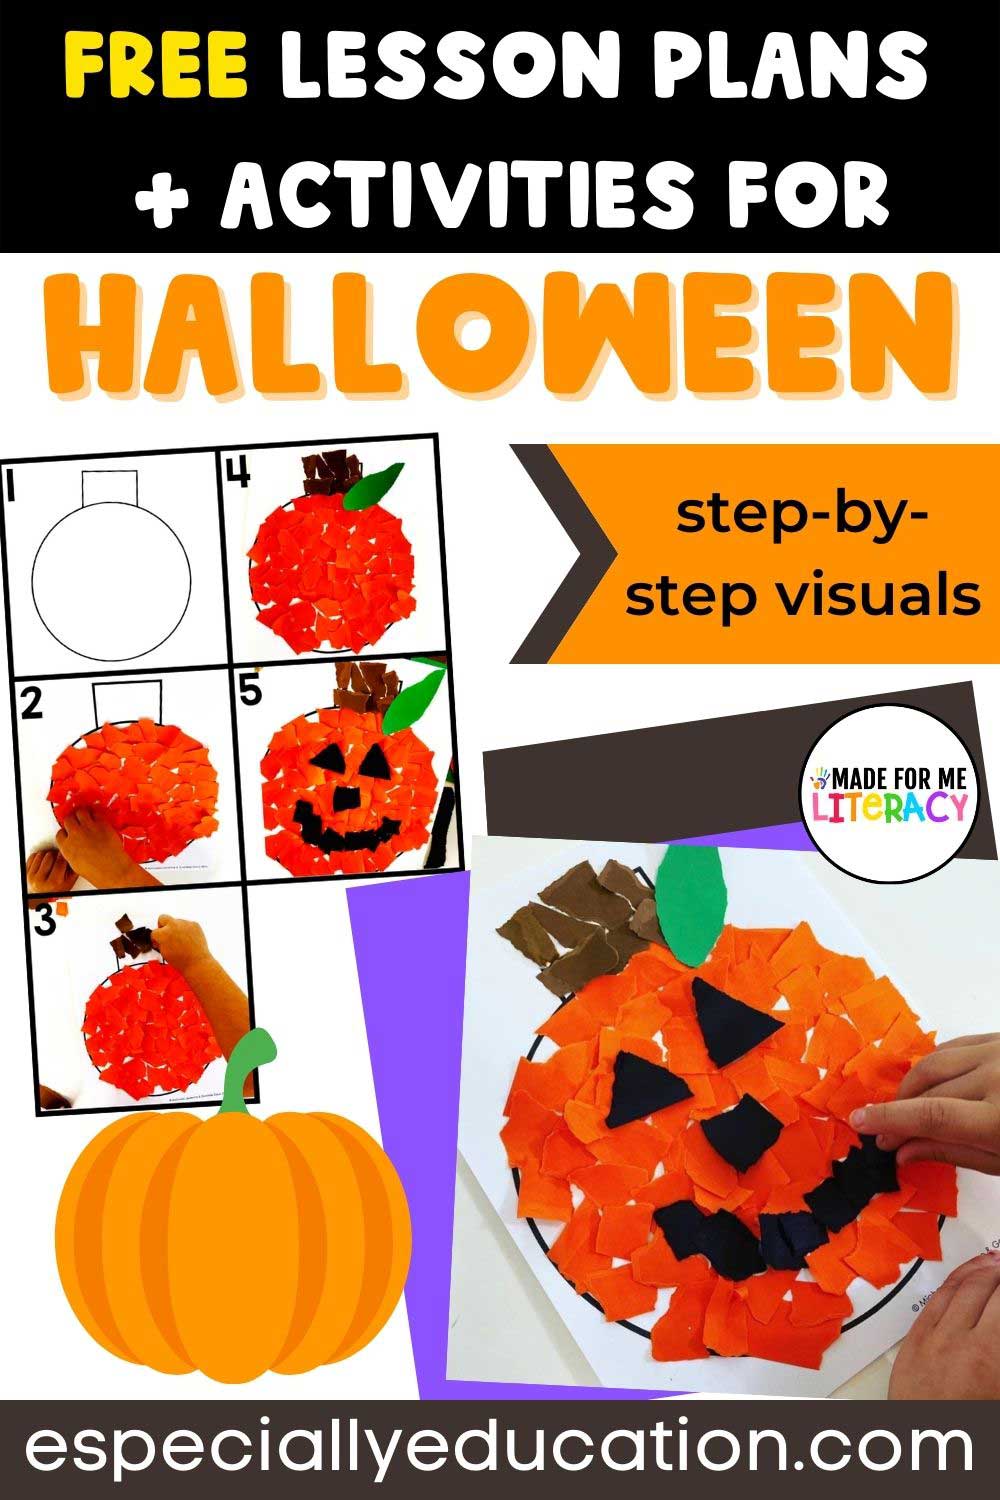 A child working on a pumpkin themed easy art craft collage made with construction paper